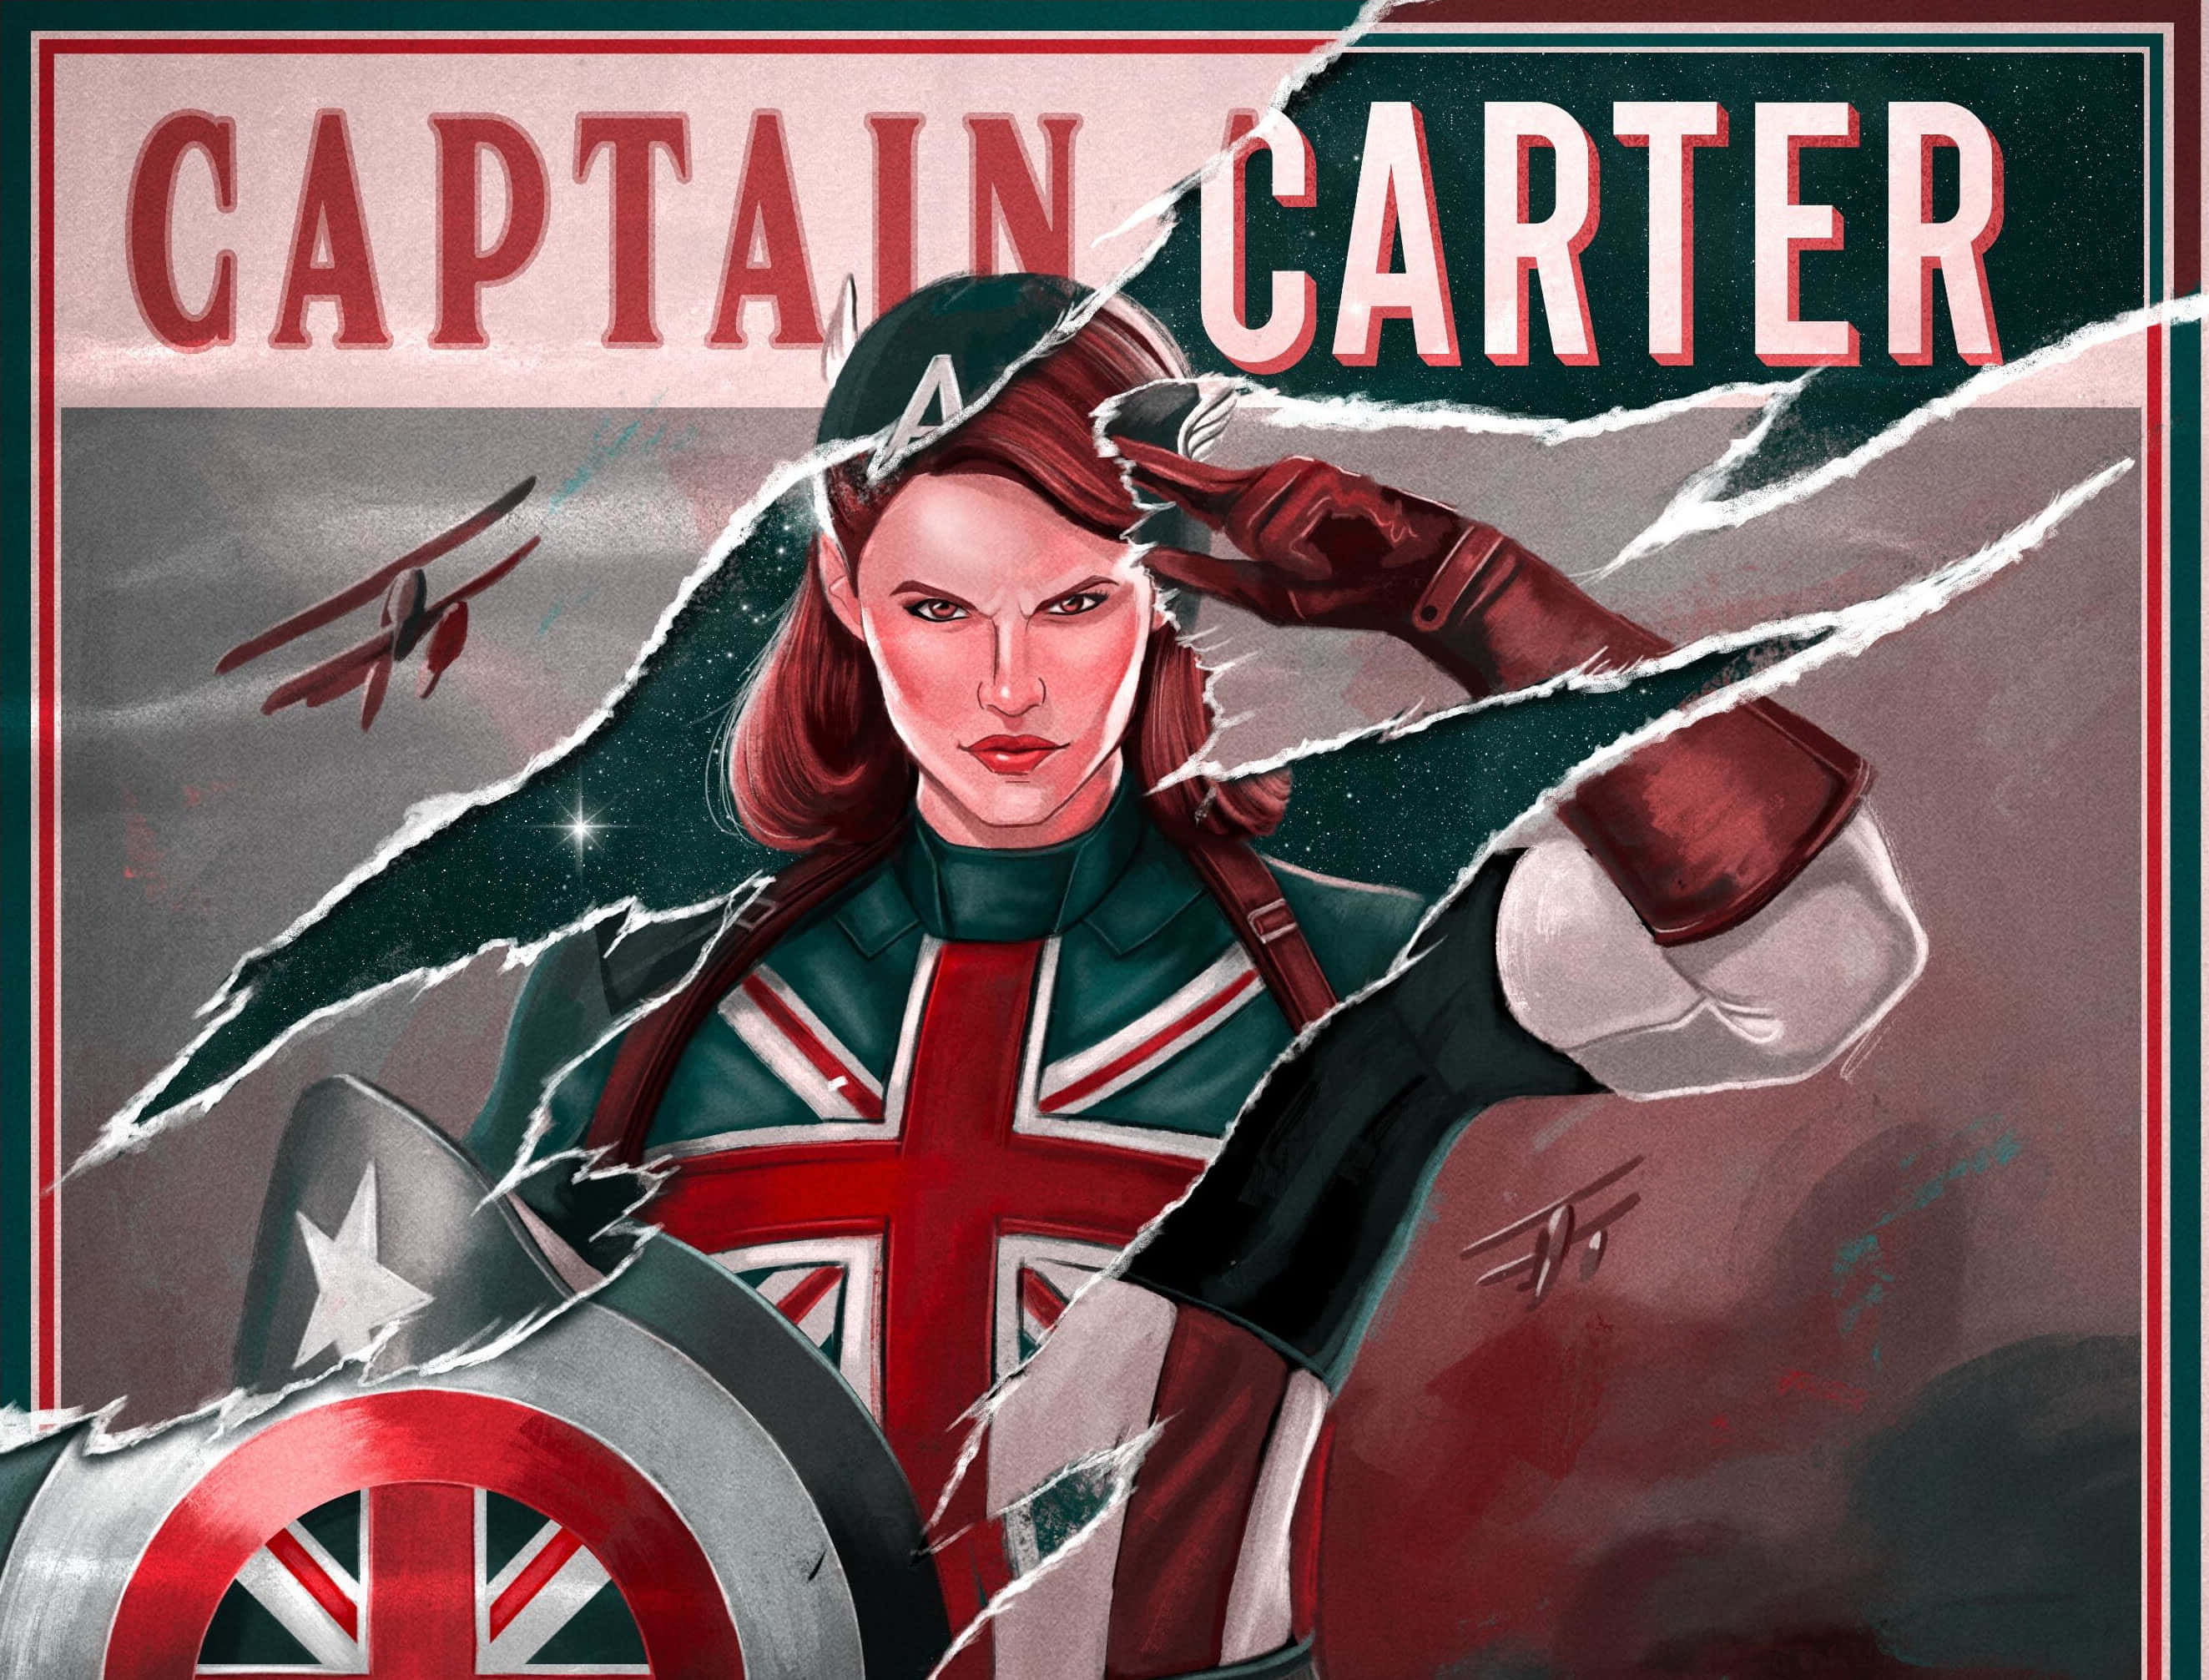 Peggy Carter, played by Hayley Atwell, looking fierce as ever. Wallpaper